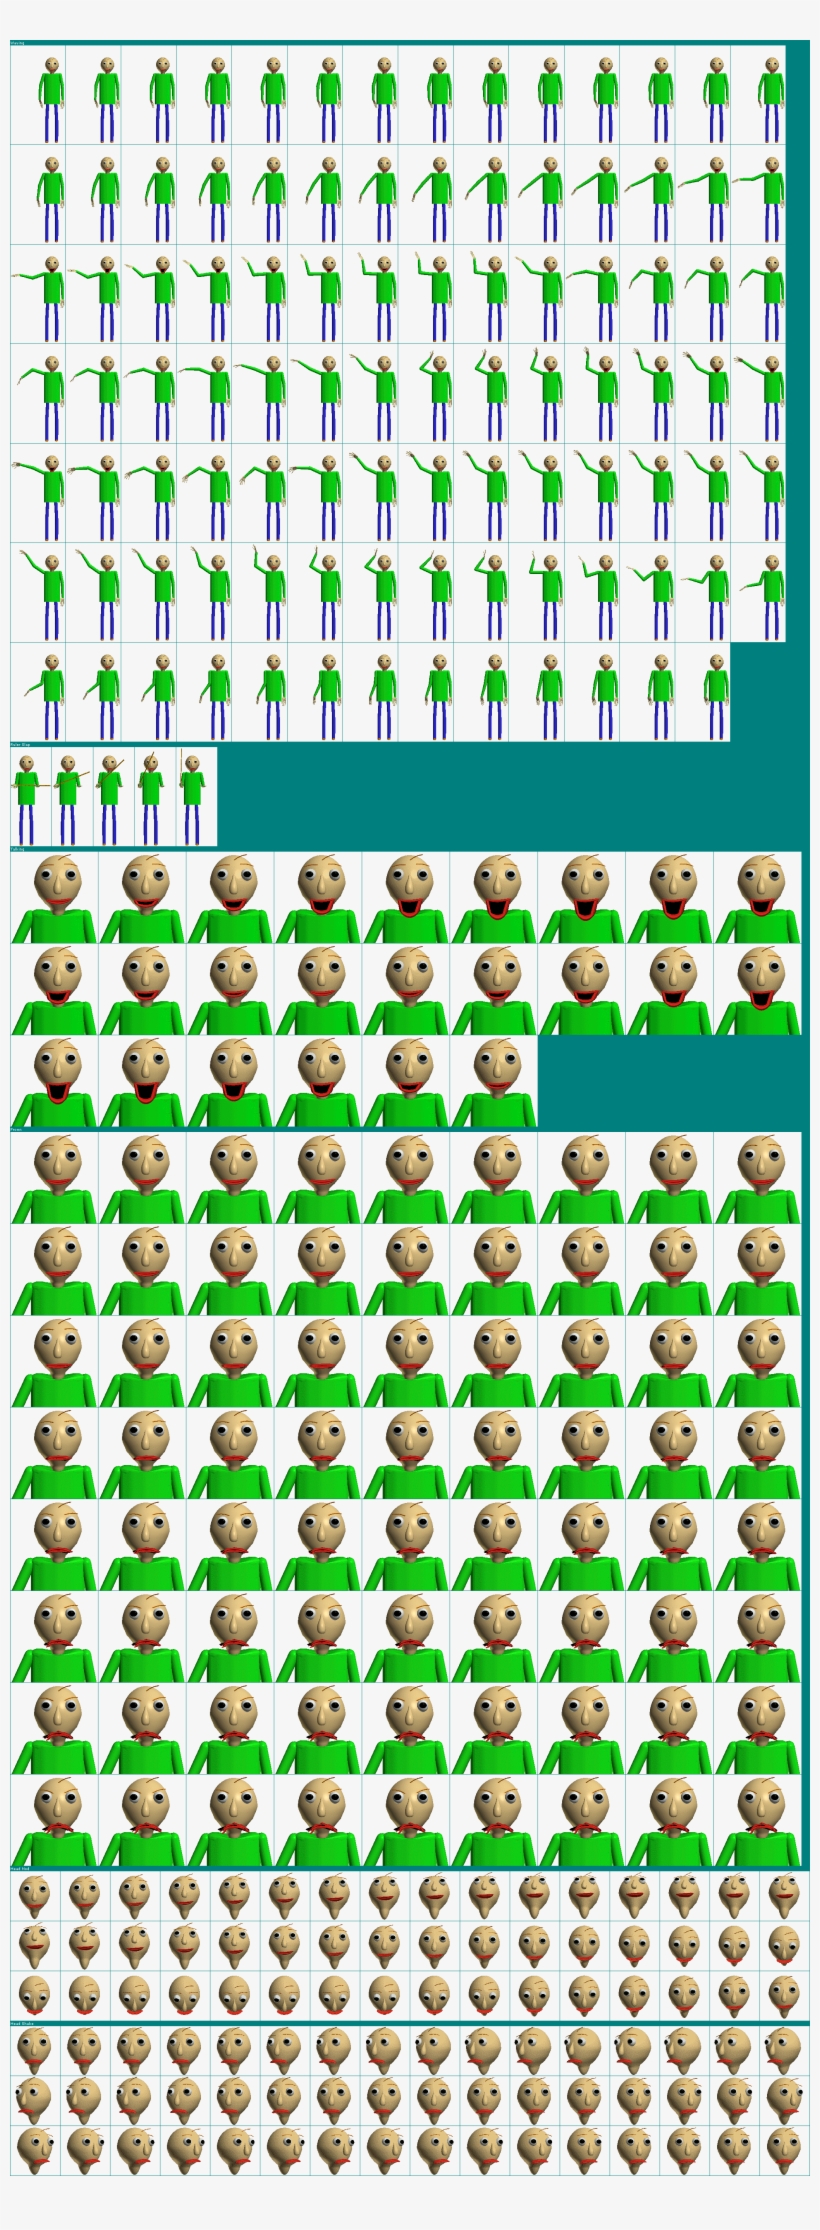 Click For Full Sized Image Baldi - Baldi's Basics In Education And Learning Sprites, transparent png #2300000